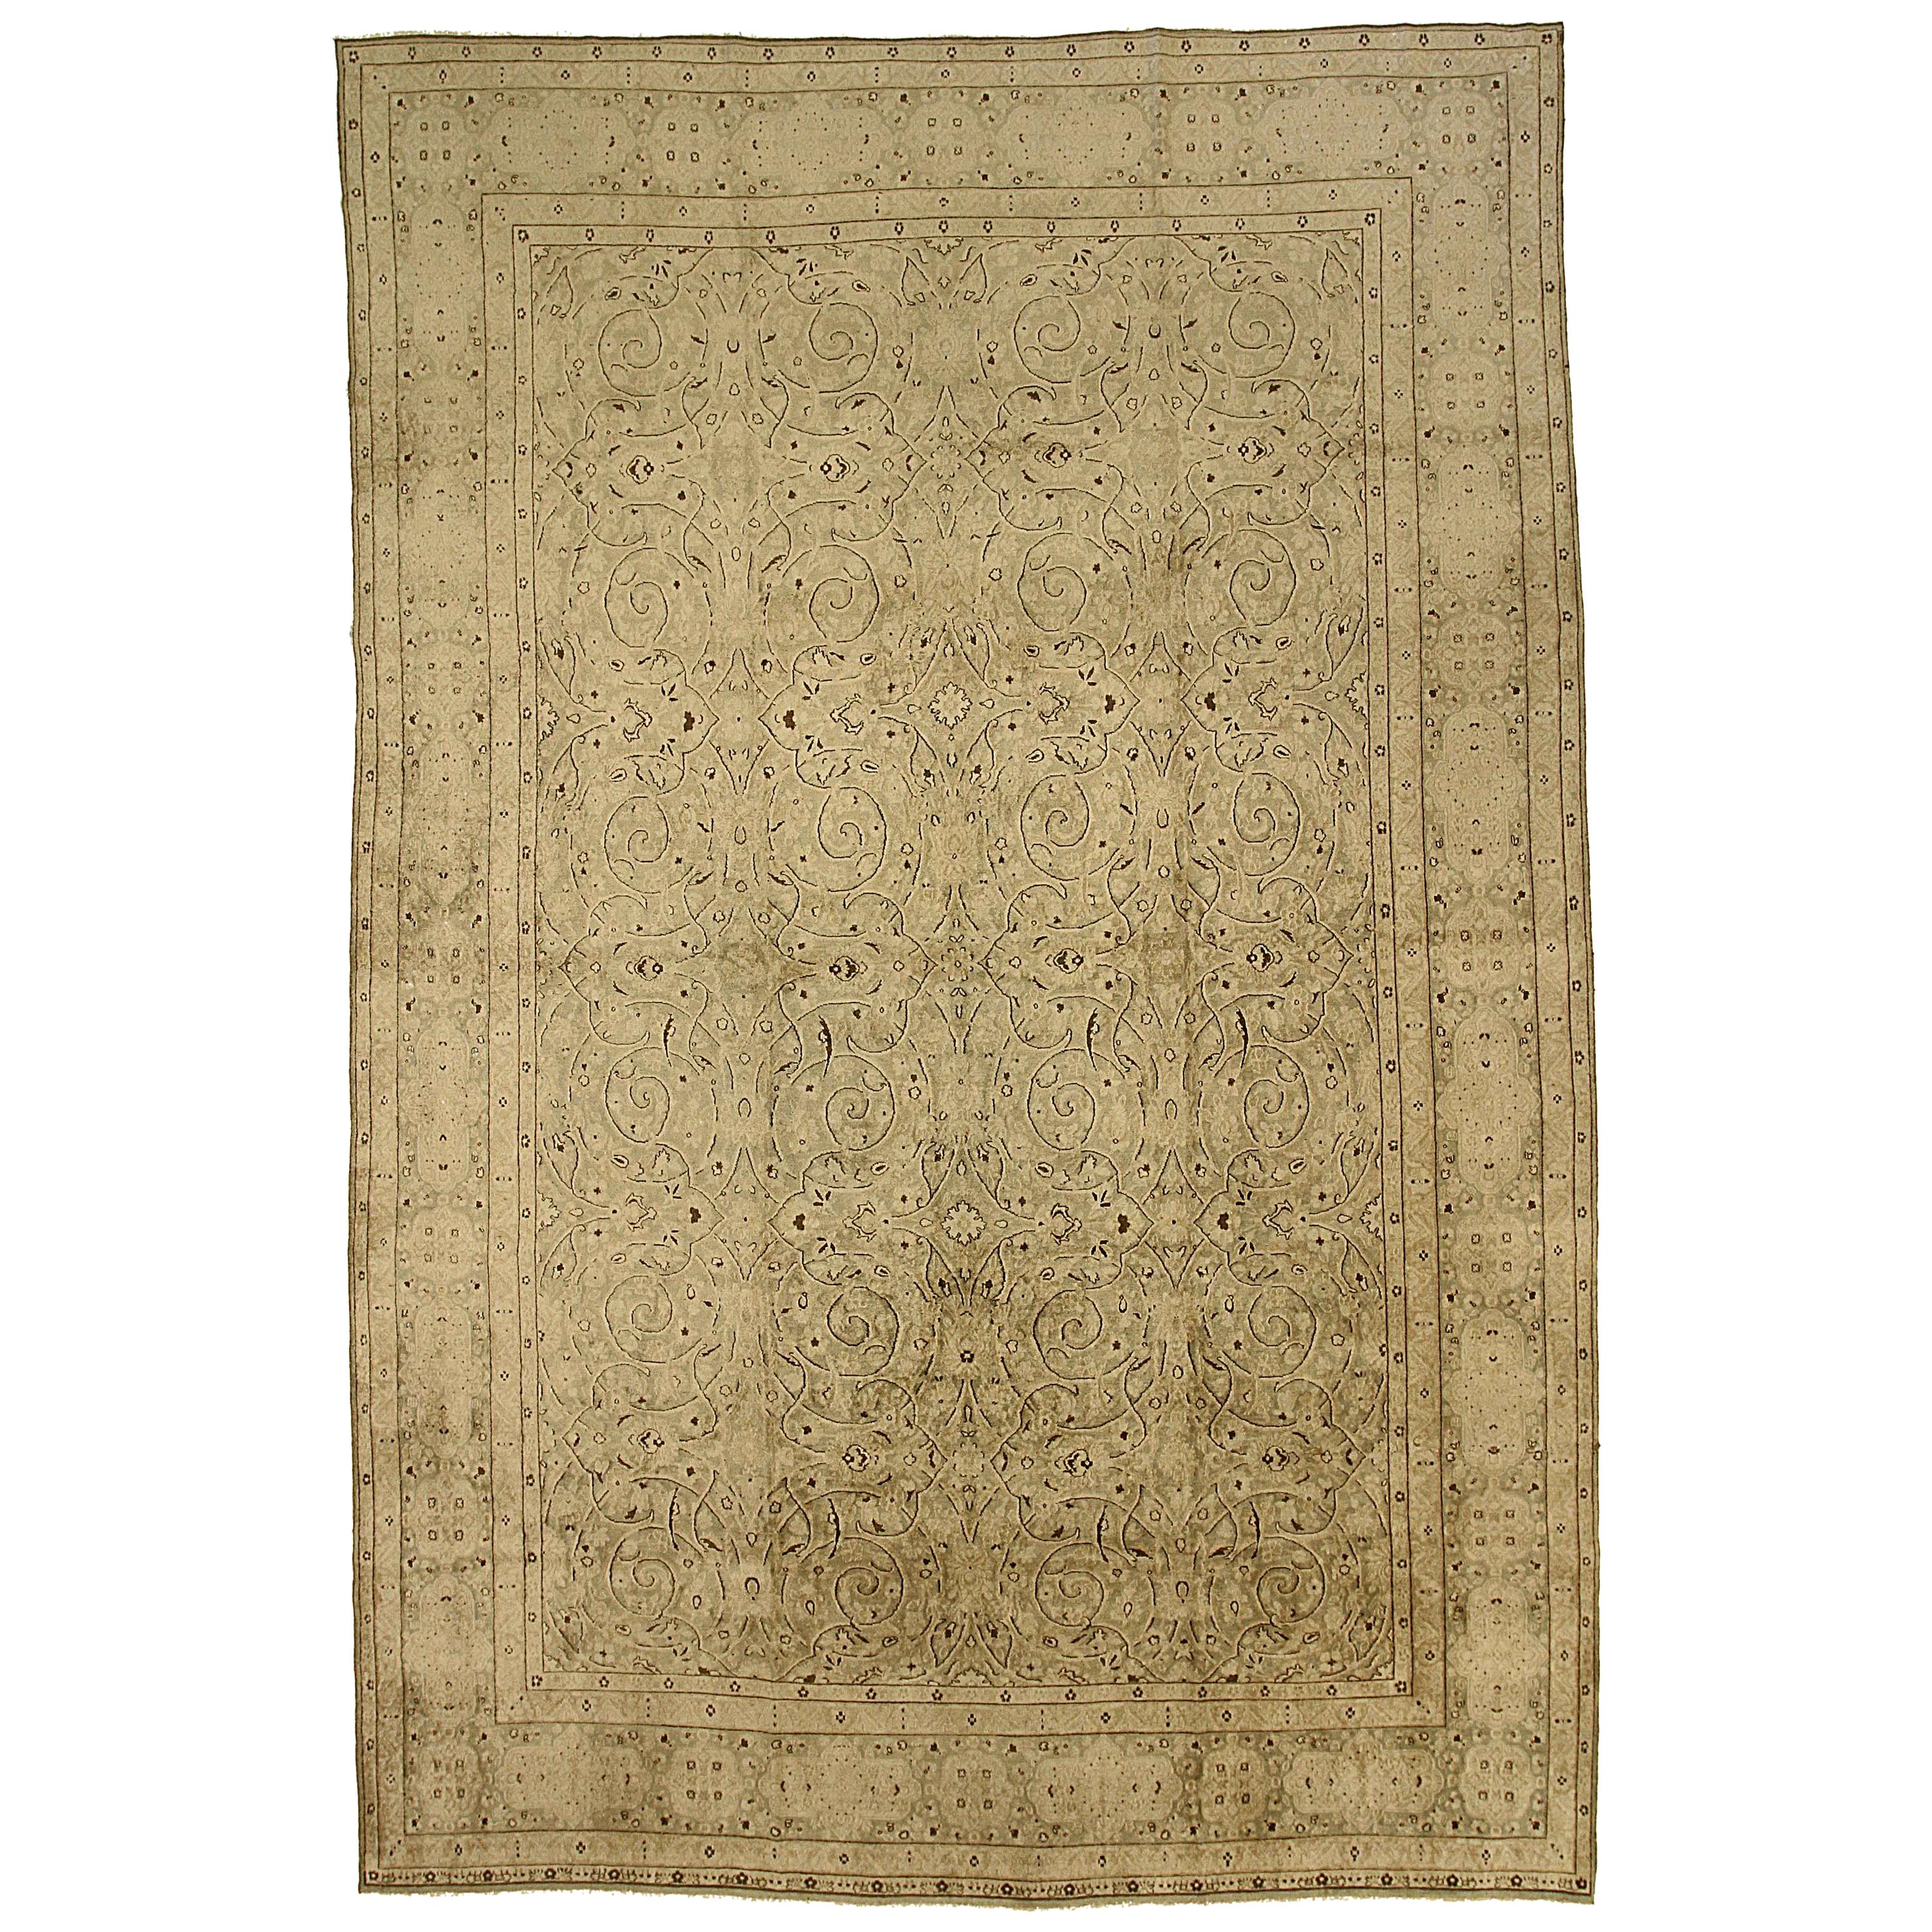 Antique Kerman Persian Rug with Ivory and Brown Floral Details, circa 1950s